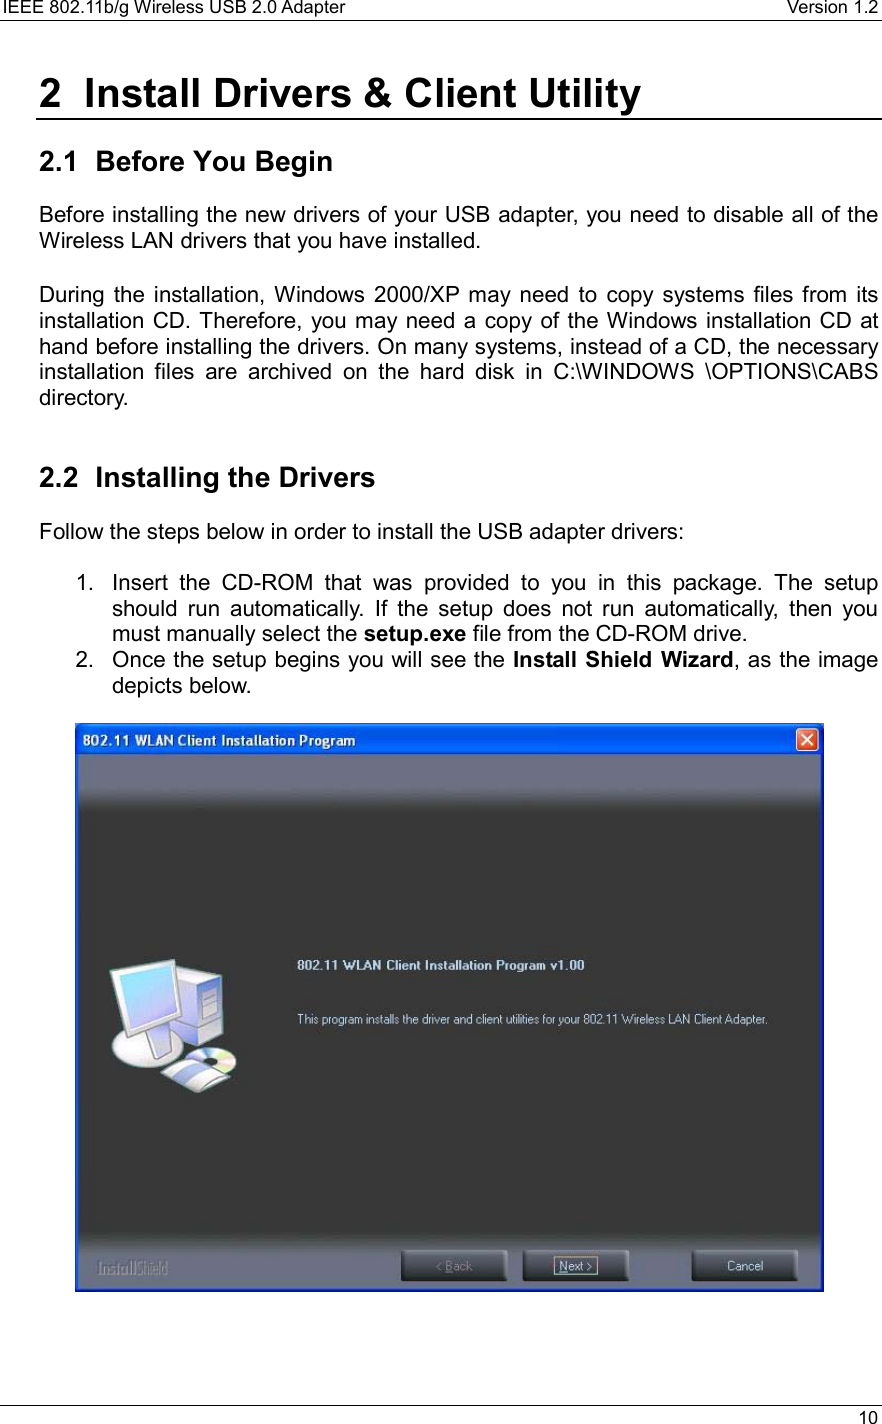 IEEE 802.11b/g Wireless USB 2.0 Adapter    Version 1.2   10  2  Install Drivers &amp; Client Utility  2.1  Before You Begin Before installing the new drivers of your USB adapter, you need to disable all of the Wireless LAN drivers that you have installed.  During the installation, Windows 2000/XP may need to copy systems files from its installation CD. Therefore, you may need a copy of the Windows installation CD at hand before installing the drivers. On many systems, instead of a CD, the necessary installation files are archived on the hard disk in C:\WINDOWS \OPTIONS\CABS directory.   2.2 Installing the Drivers Follow the steps below in order to install the USB adapter drivers:  1.  Insert the CD-ROM that was provided to you in this package. The setup should run automatically. If the setup does not run automatically, then you must manually select the setup.exe file from the CD-ROM drive. 2.  Once the setup begins you will see the Install Shield Wizard, as the image depicts below.      